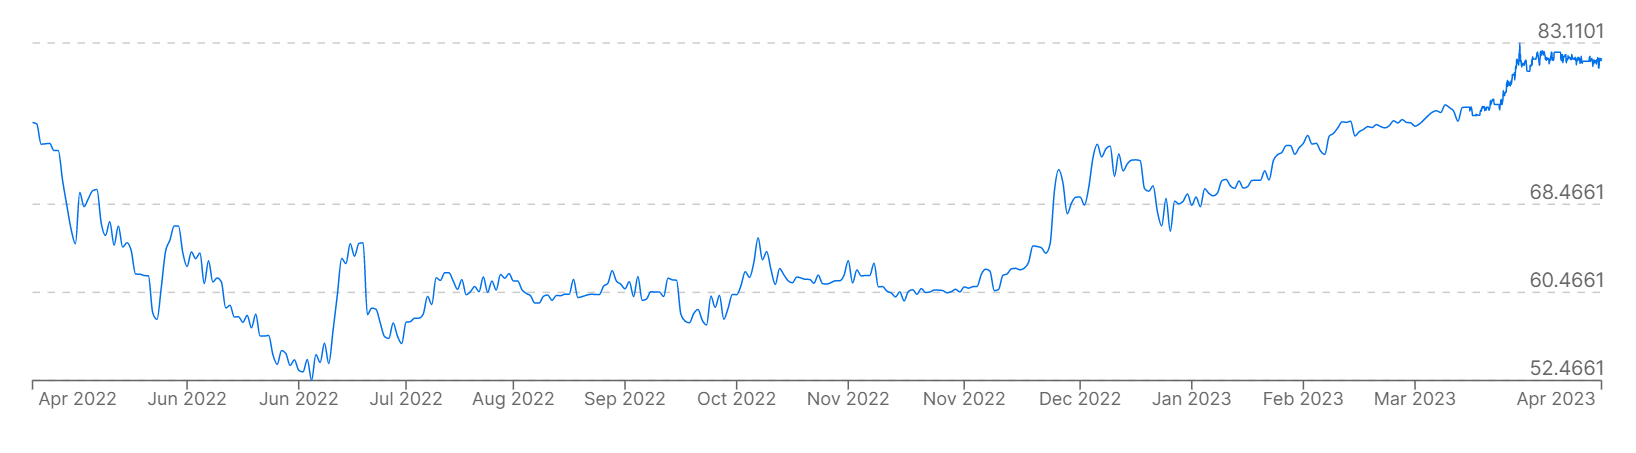 A graph showing the price of the US dollar versus Russia&amp;amp;rsquo;s ruble over the past 12 months.